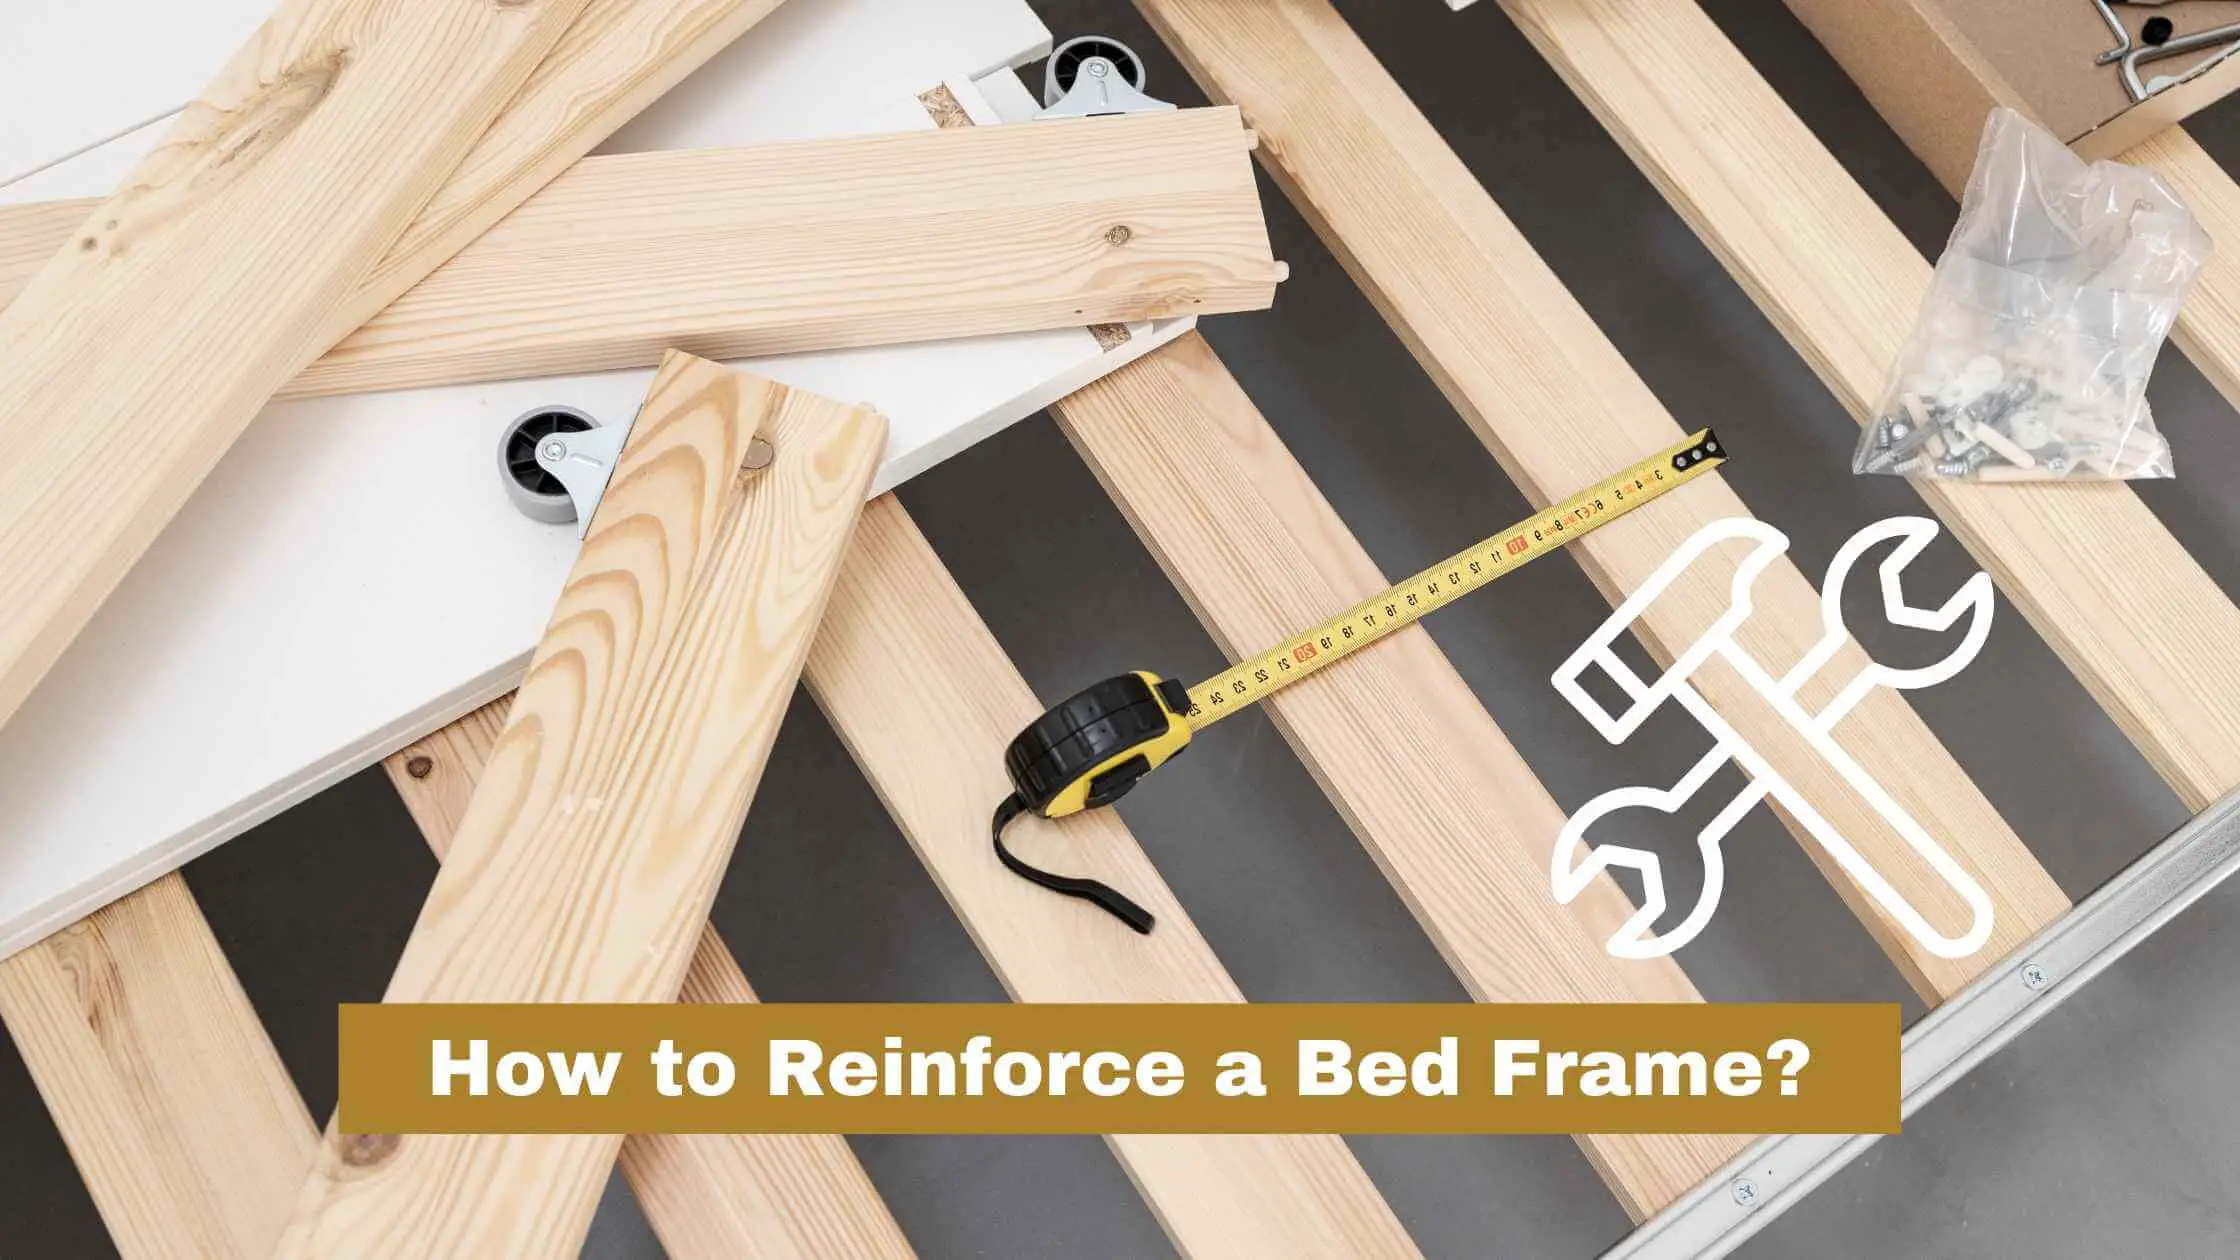 How to Reinforce a Bed Frame